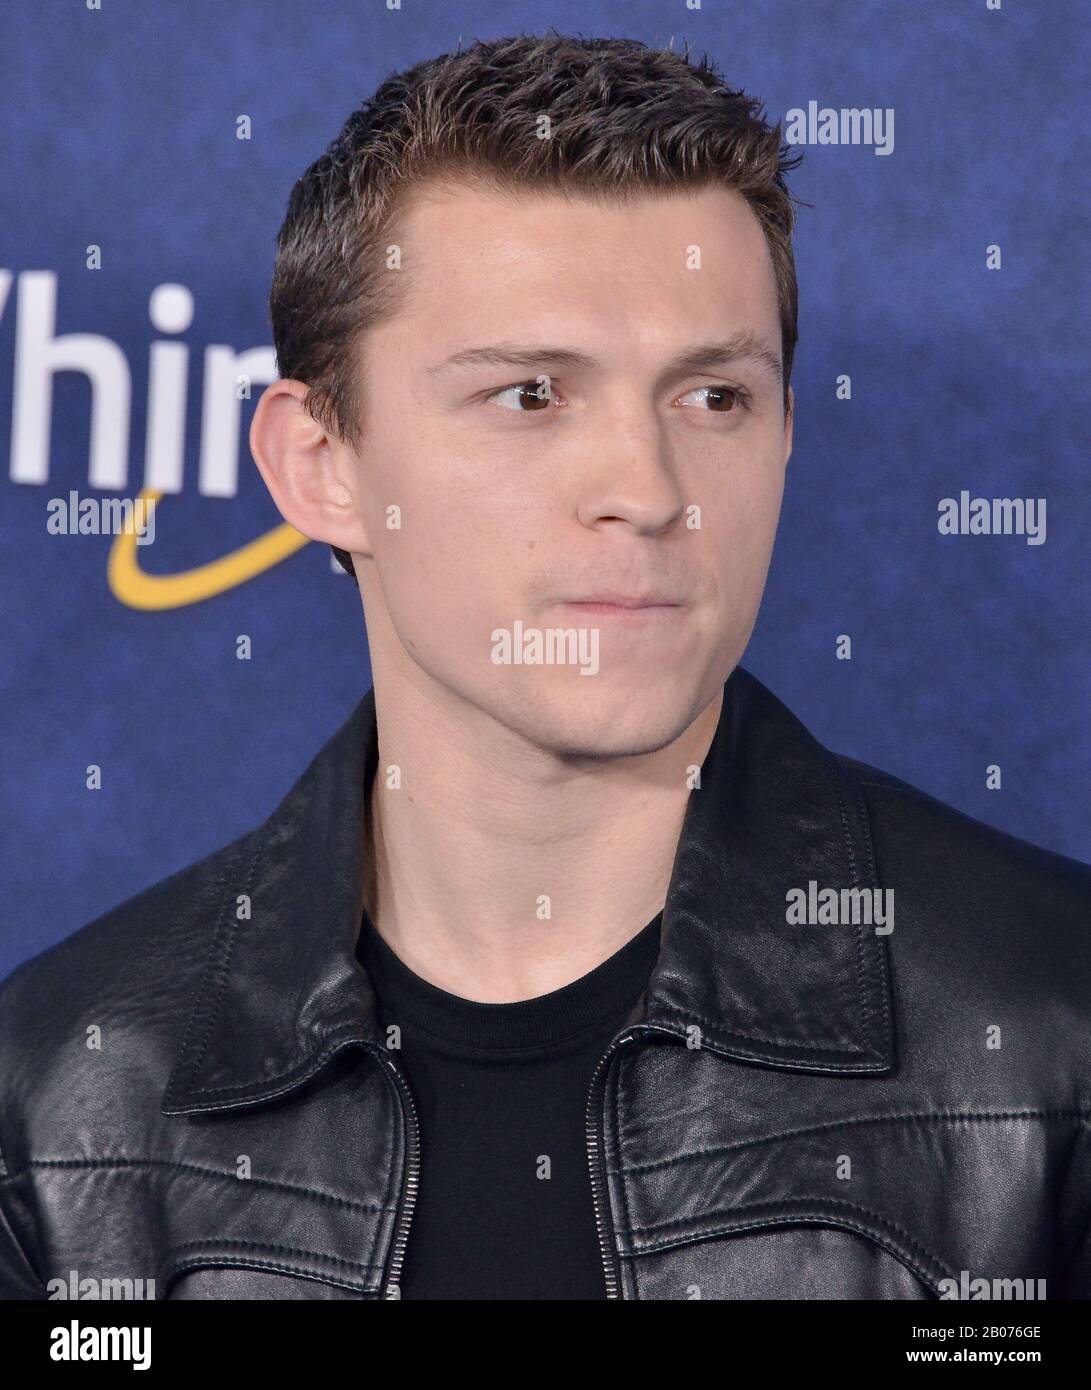 Los Angeles, USA. 18th Feb 2020. Tom Holland arrives at the Disney And Pixar's ONWARD World Premiere held at the El Capitan Theatre in Hollywood, CA on Tuesday, ?February 18, 2020.  (Photo By Sthanlee B. Mirador/Sipa USA) Credit: Sipa USA/Alamy Live News Stock Photo